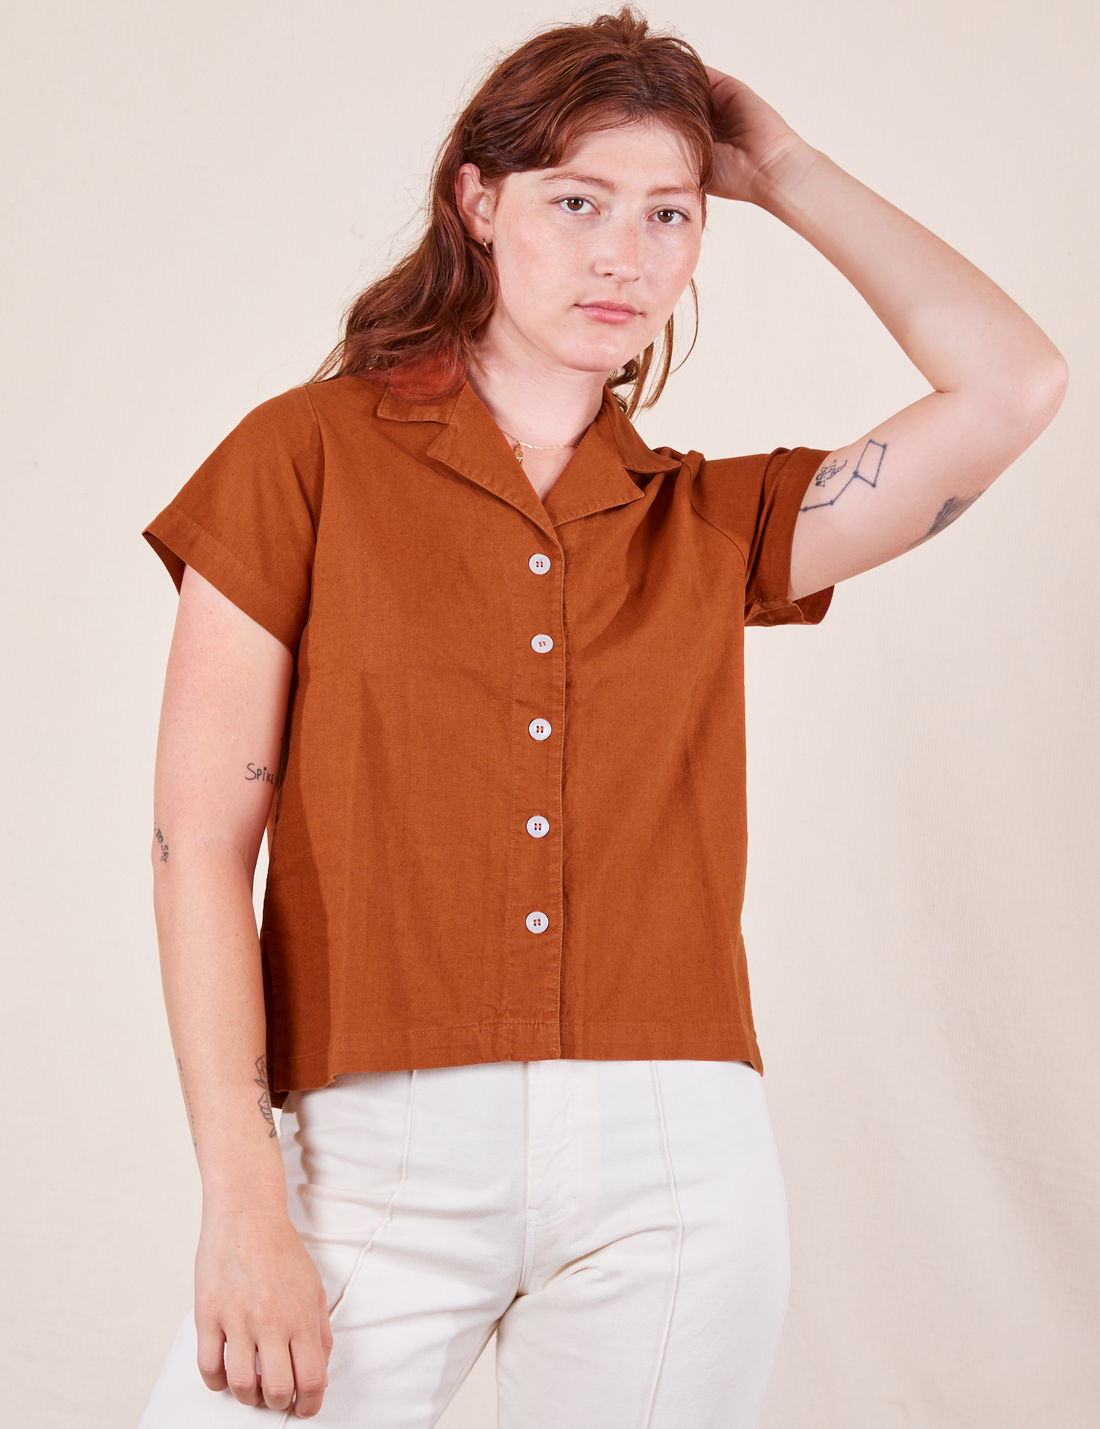 Alex is wearing Pantry Button-Up in Burnt Terracotta